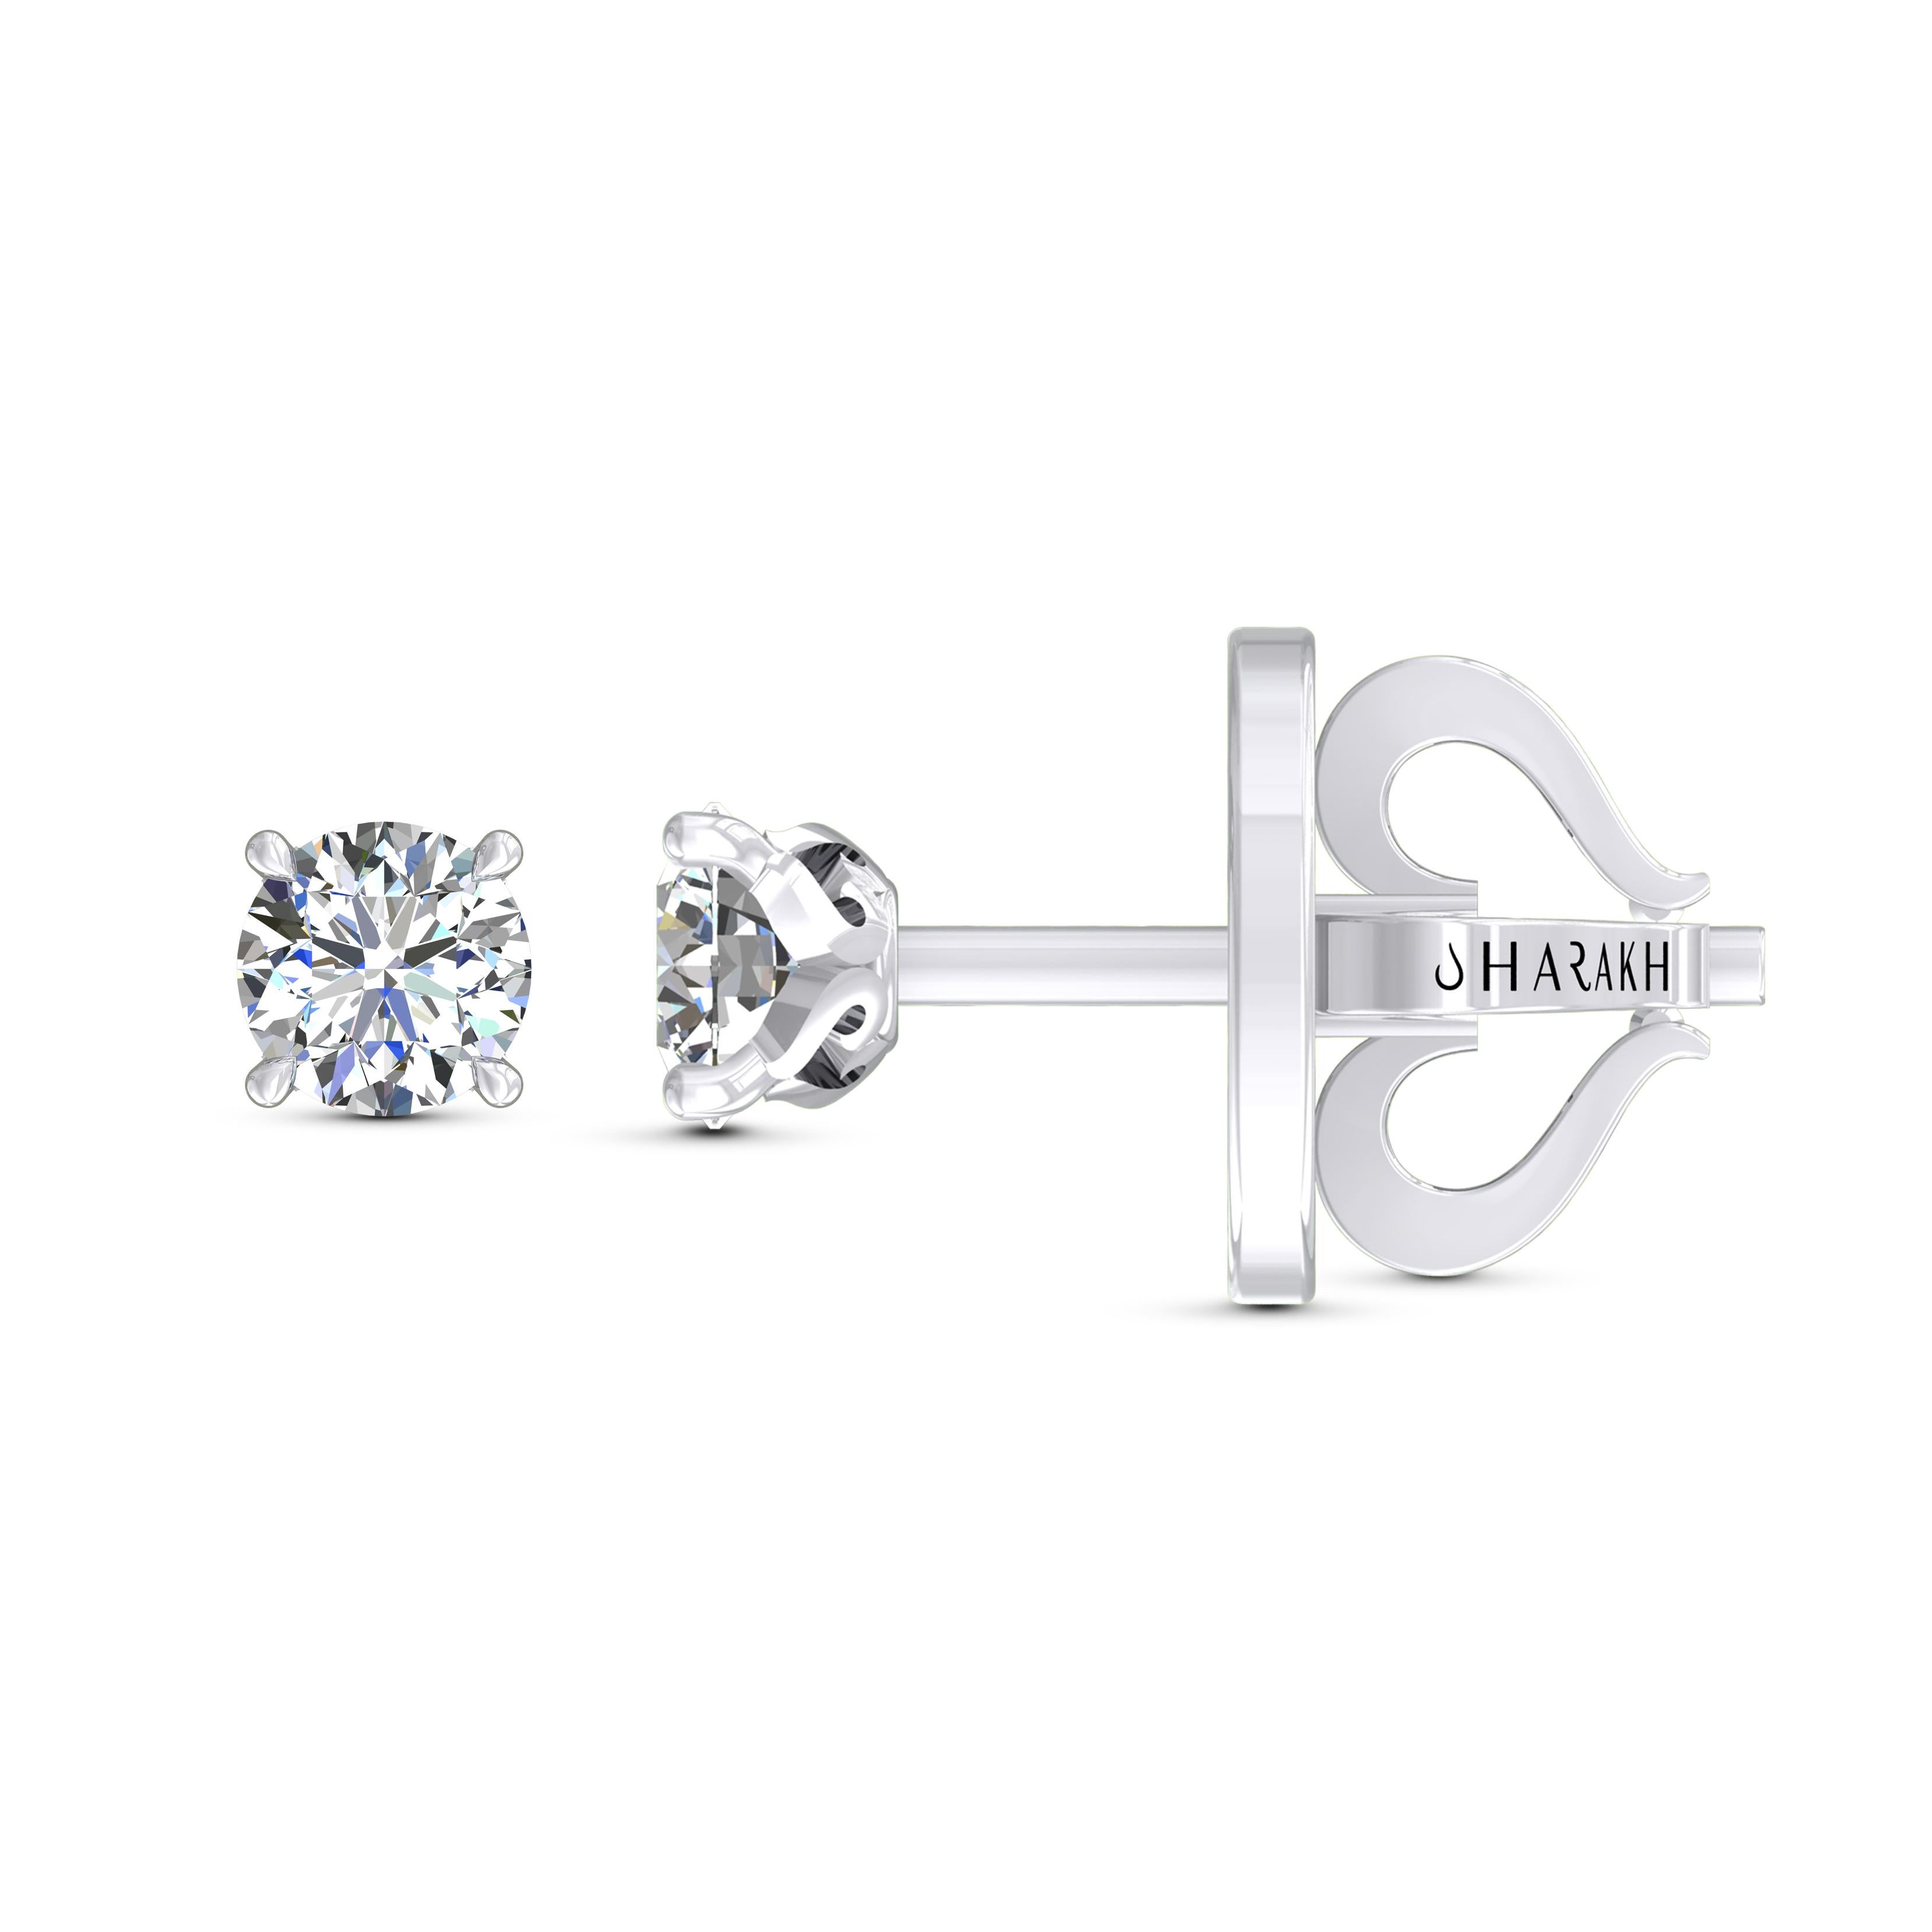 Contemporary Harakh GIA Certified 0.80 Carat D-E Color VS2 Clarity 18KT Diamond Stud Earrings For Sale